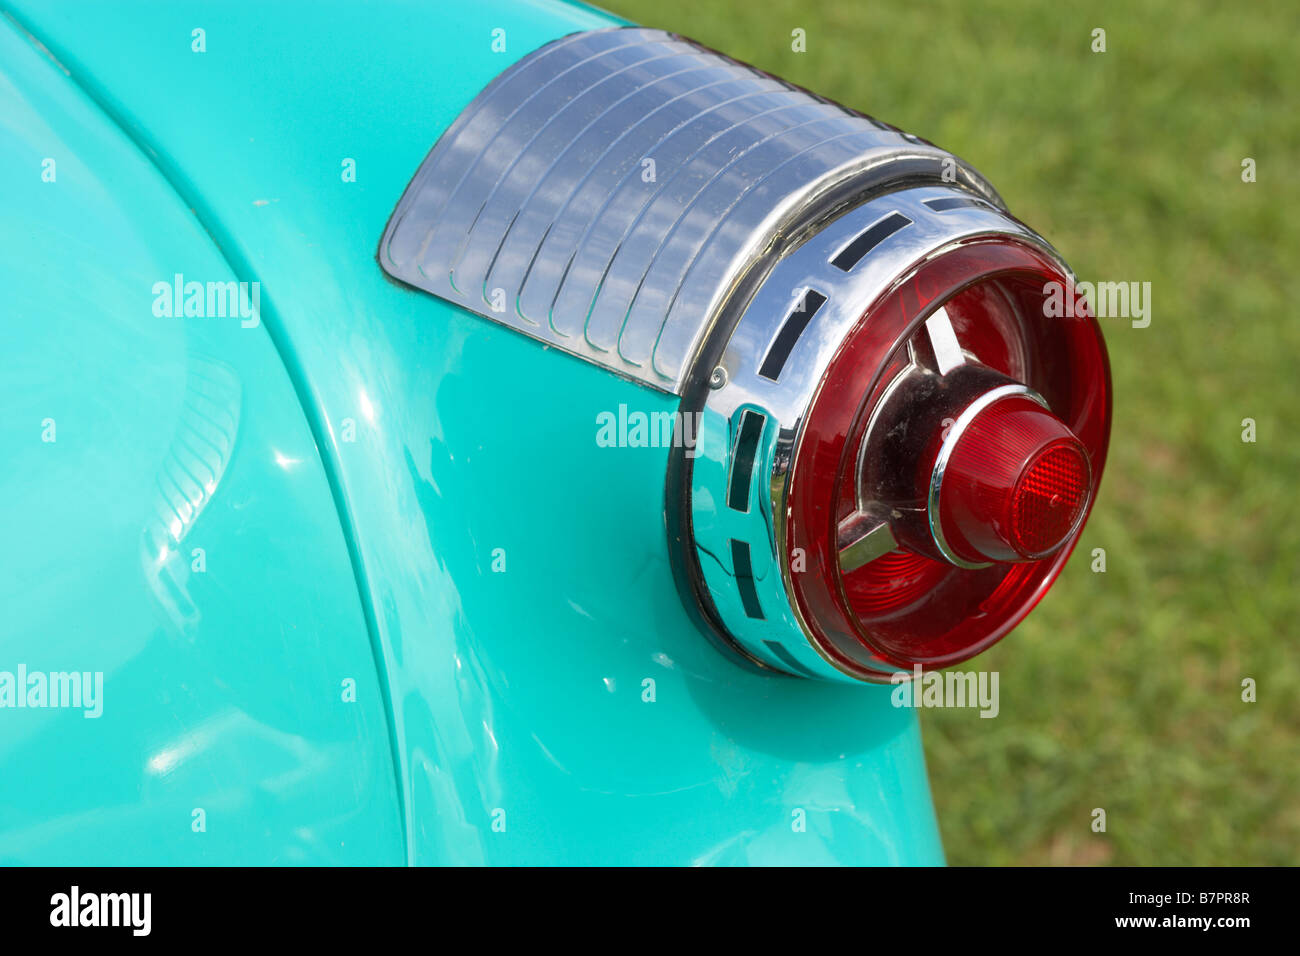 1956 FORD TAIL LIGHT DETAIL Stock Photo